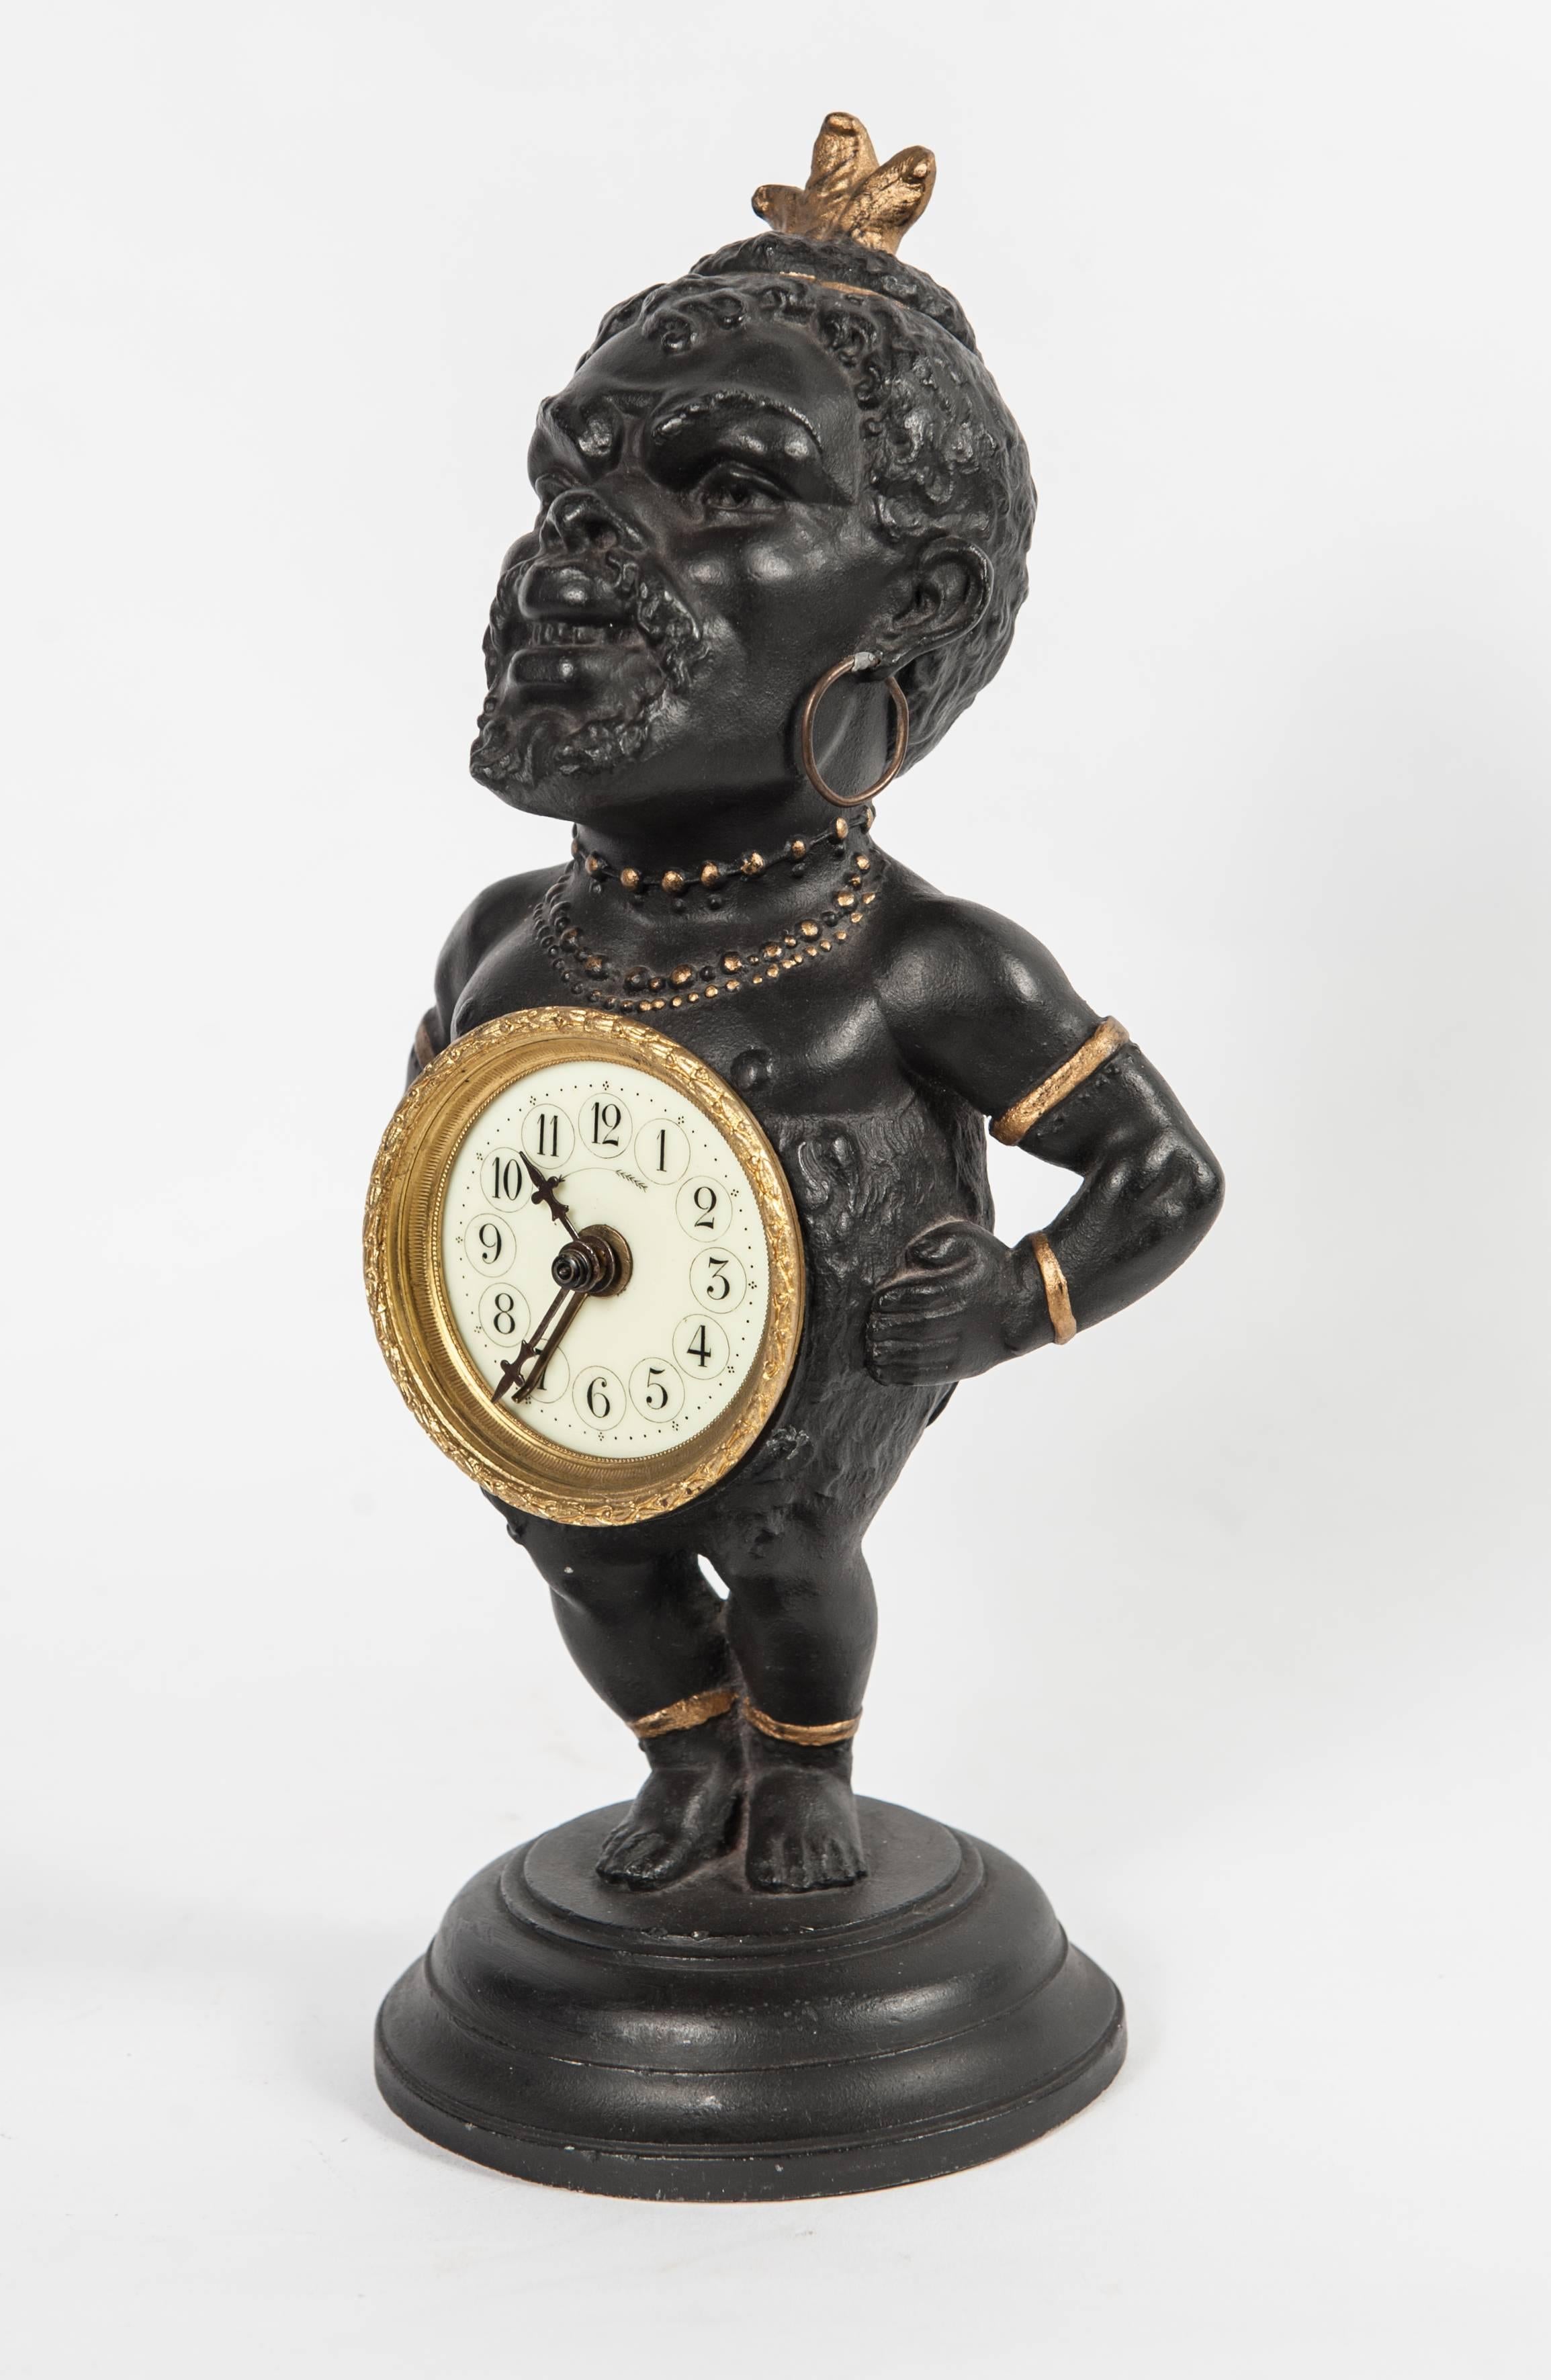 Decorative Polychrome French White Metal Time Piece Clock Figure, circa 1880 In Good Condition For Sale In Amsterdam, Noord Holland